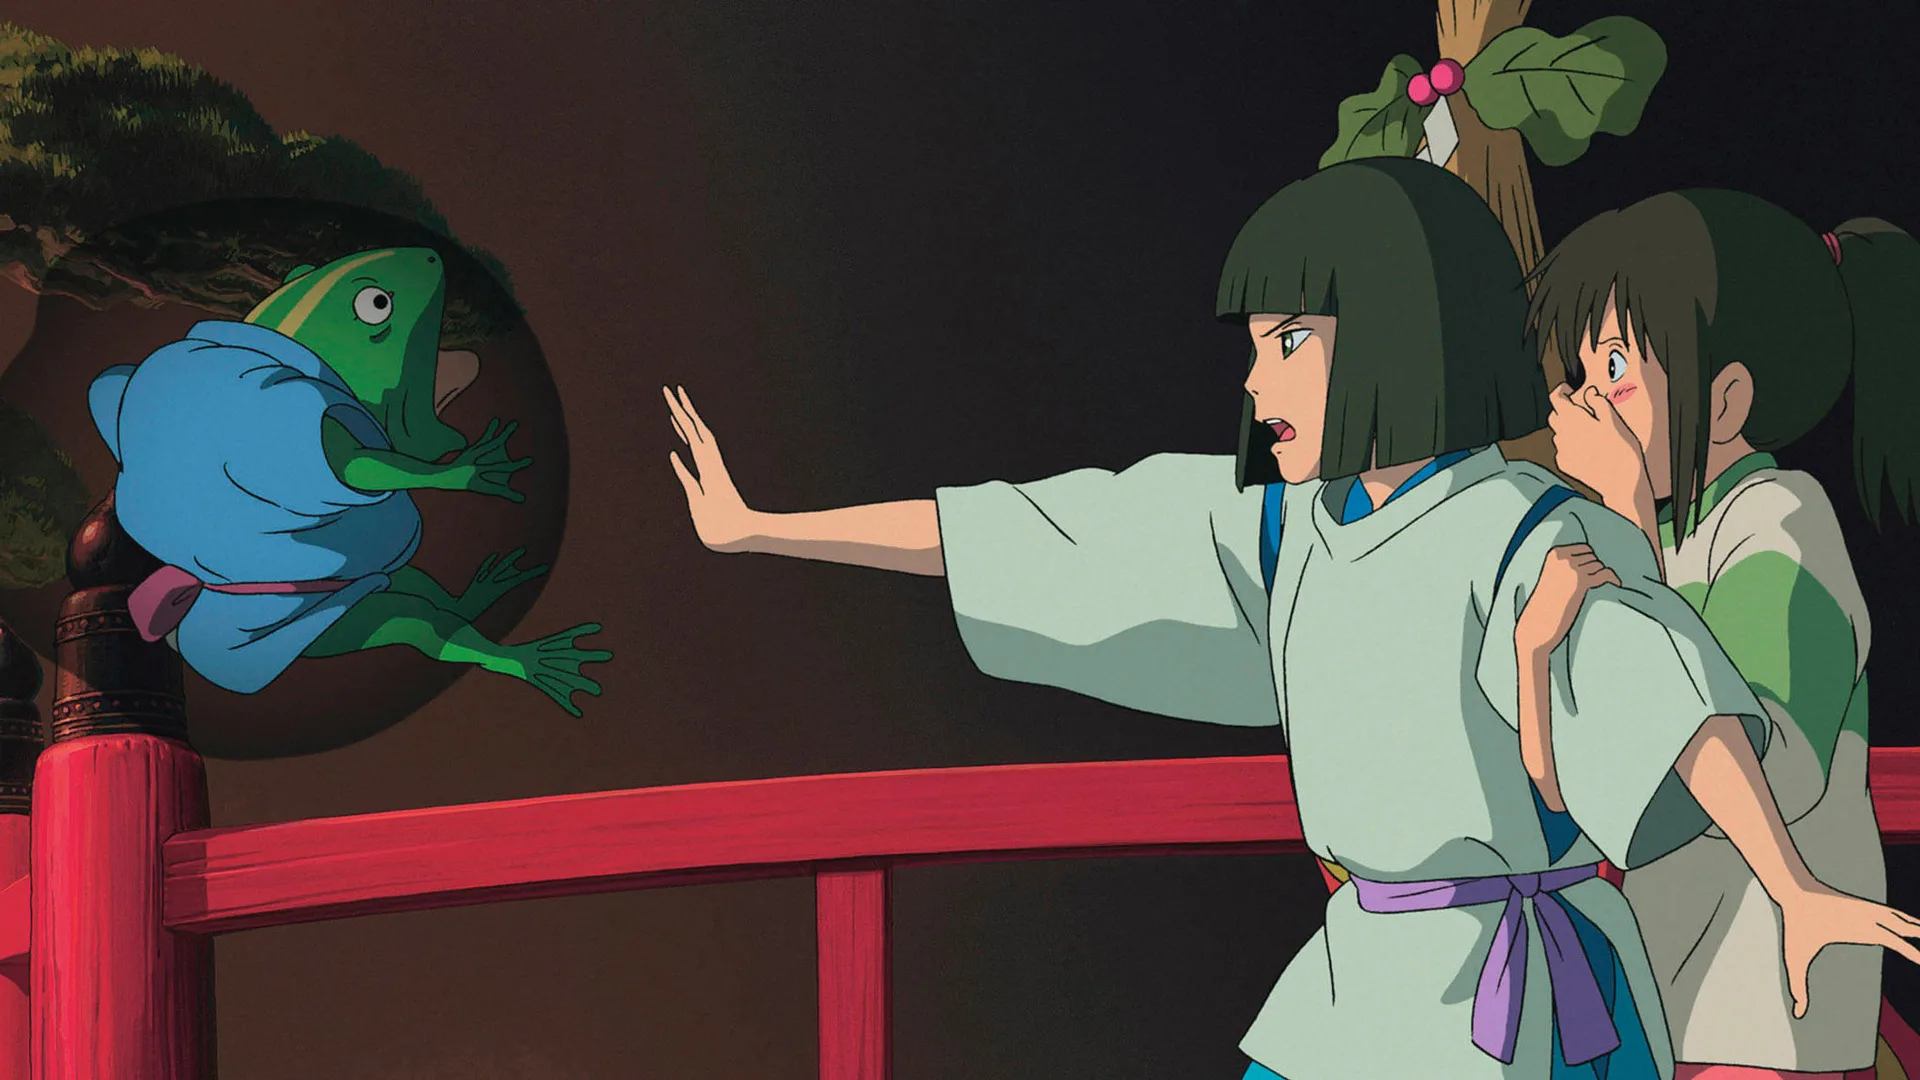 A still from the film Spirited Away showing Haku holding his arm out to put a spell on a toad with Chihiro beside him looking scared